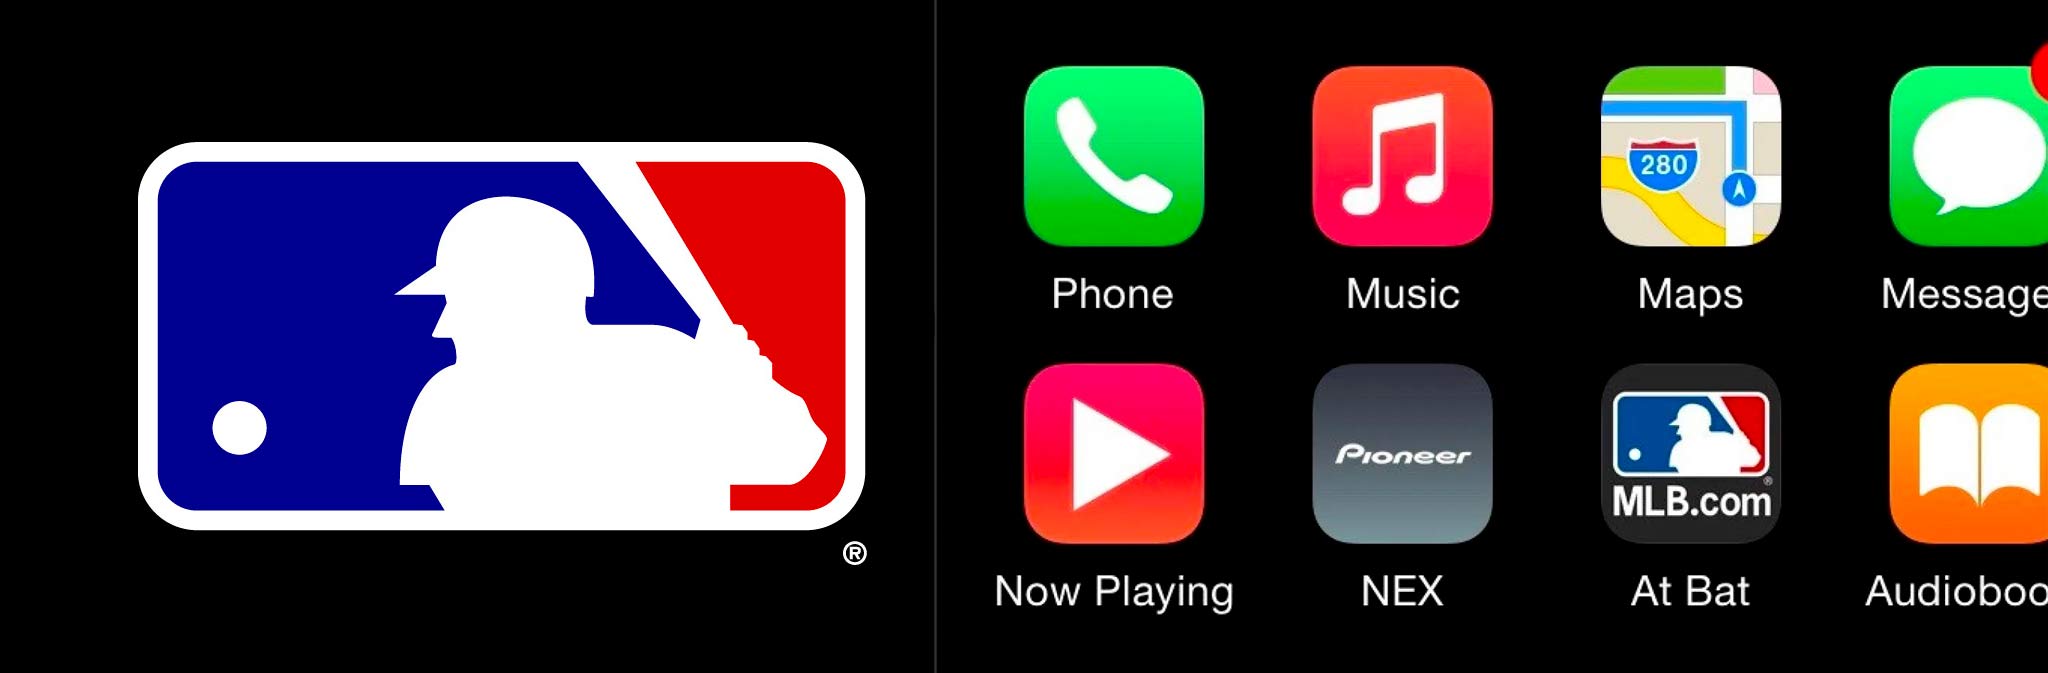 The MLB may launch streaming service for local games  no cable TV required   The Verge